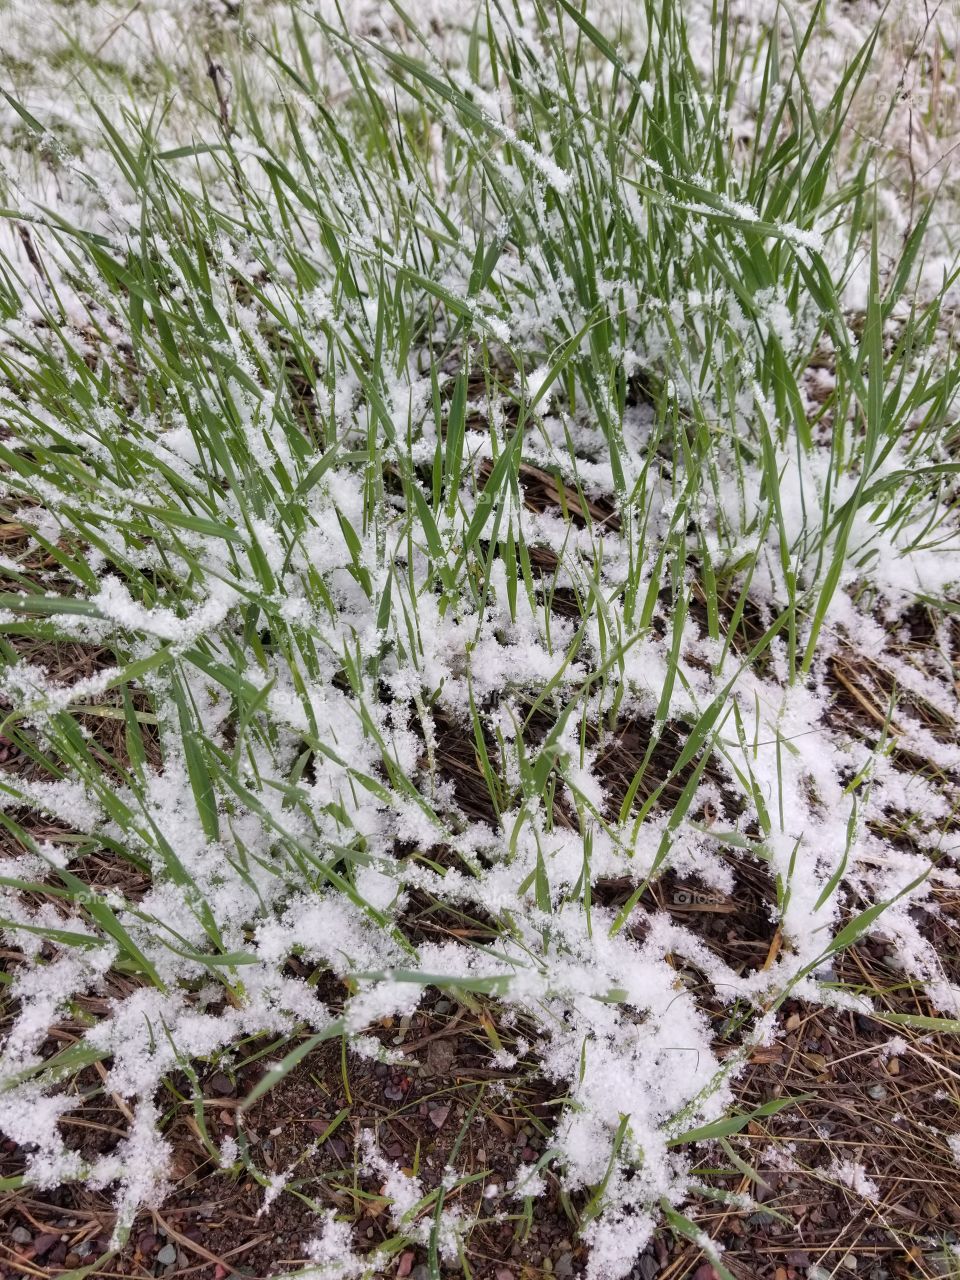 late spring snow covers the new growth of grass